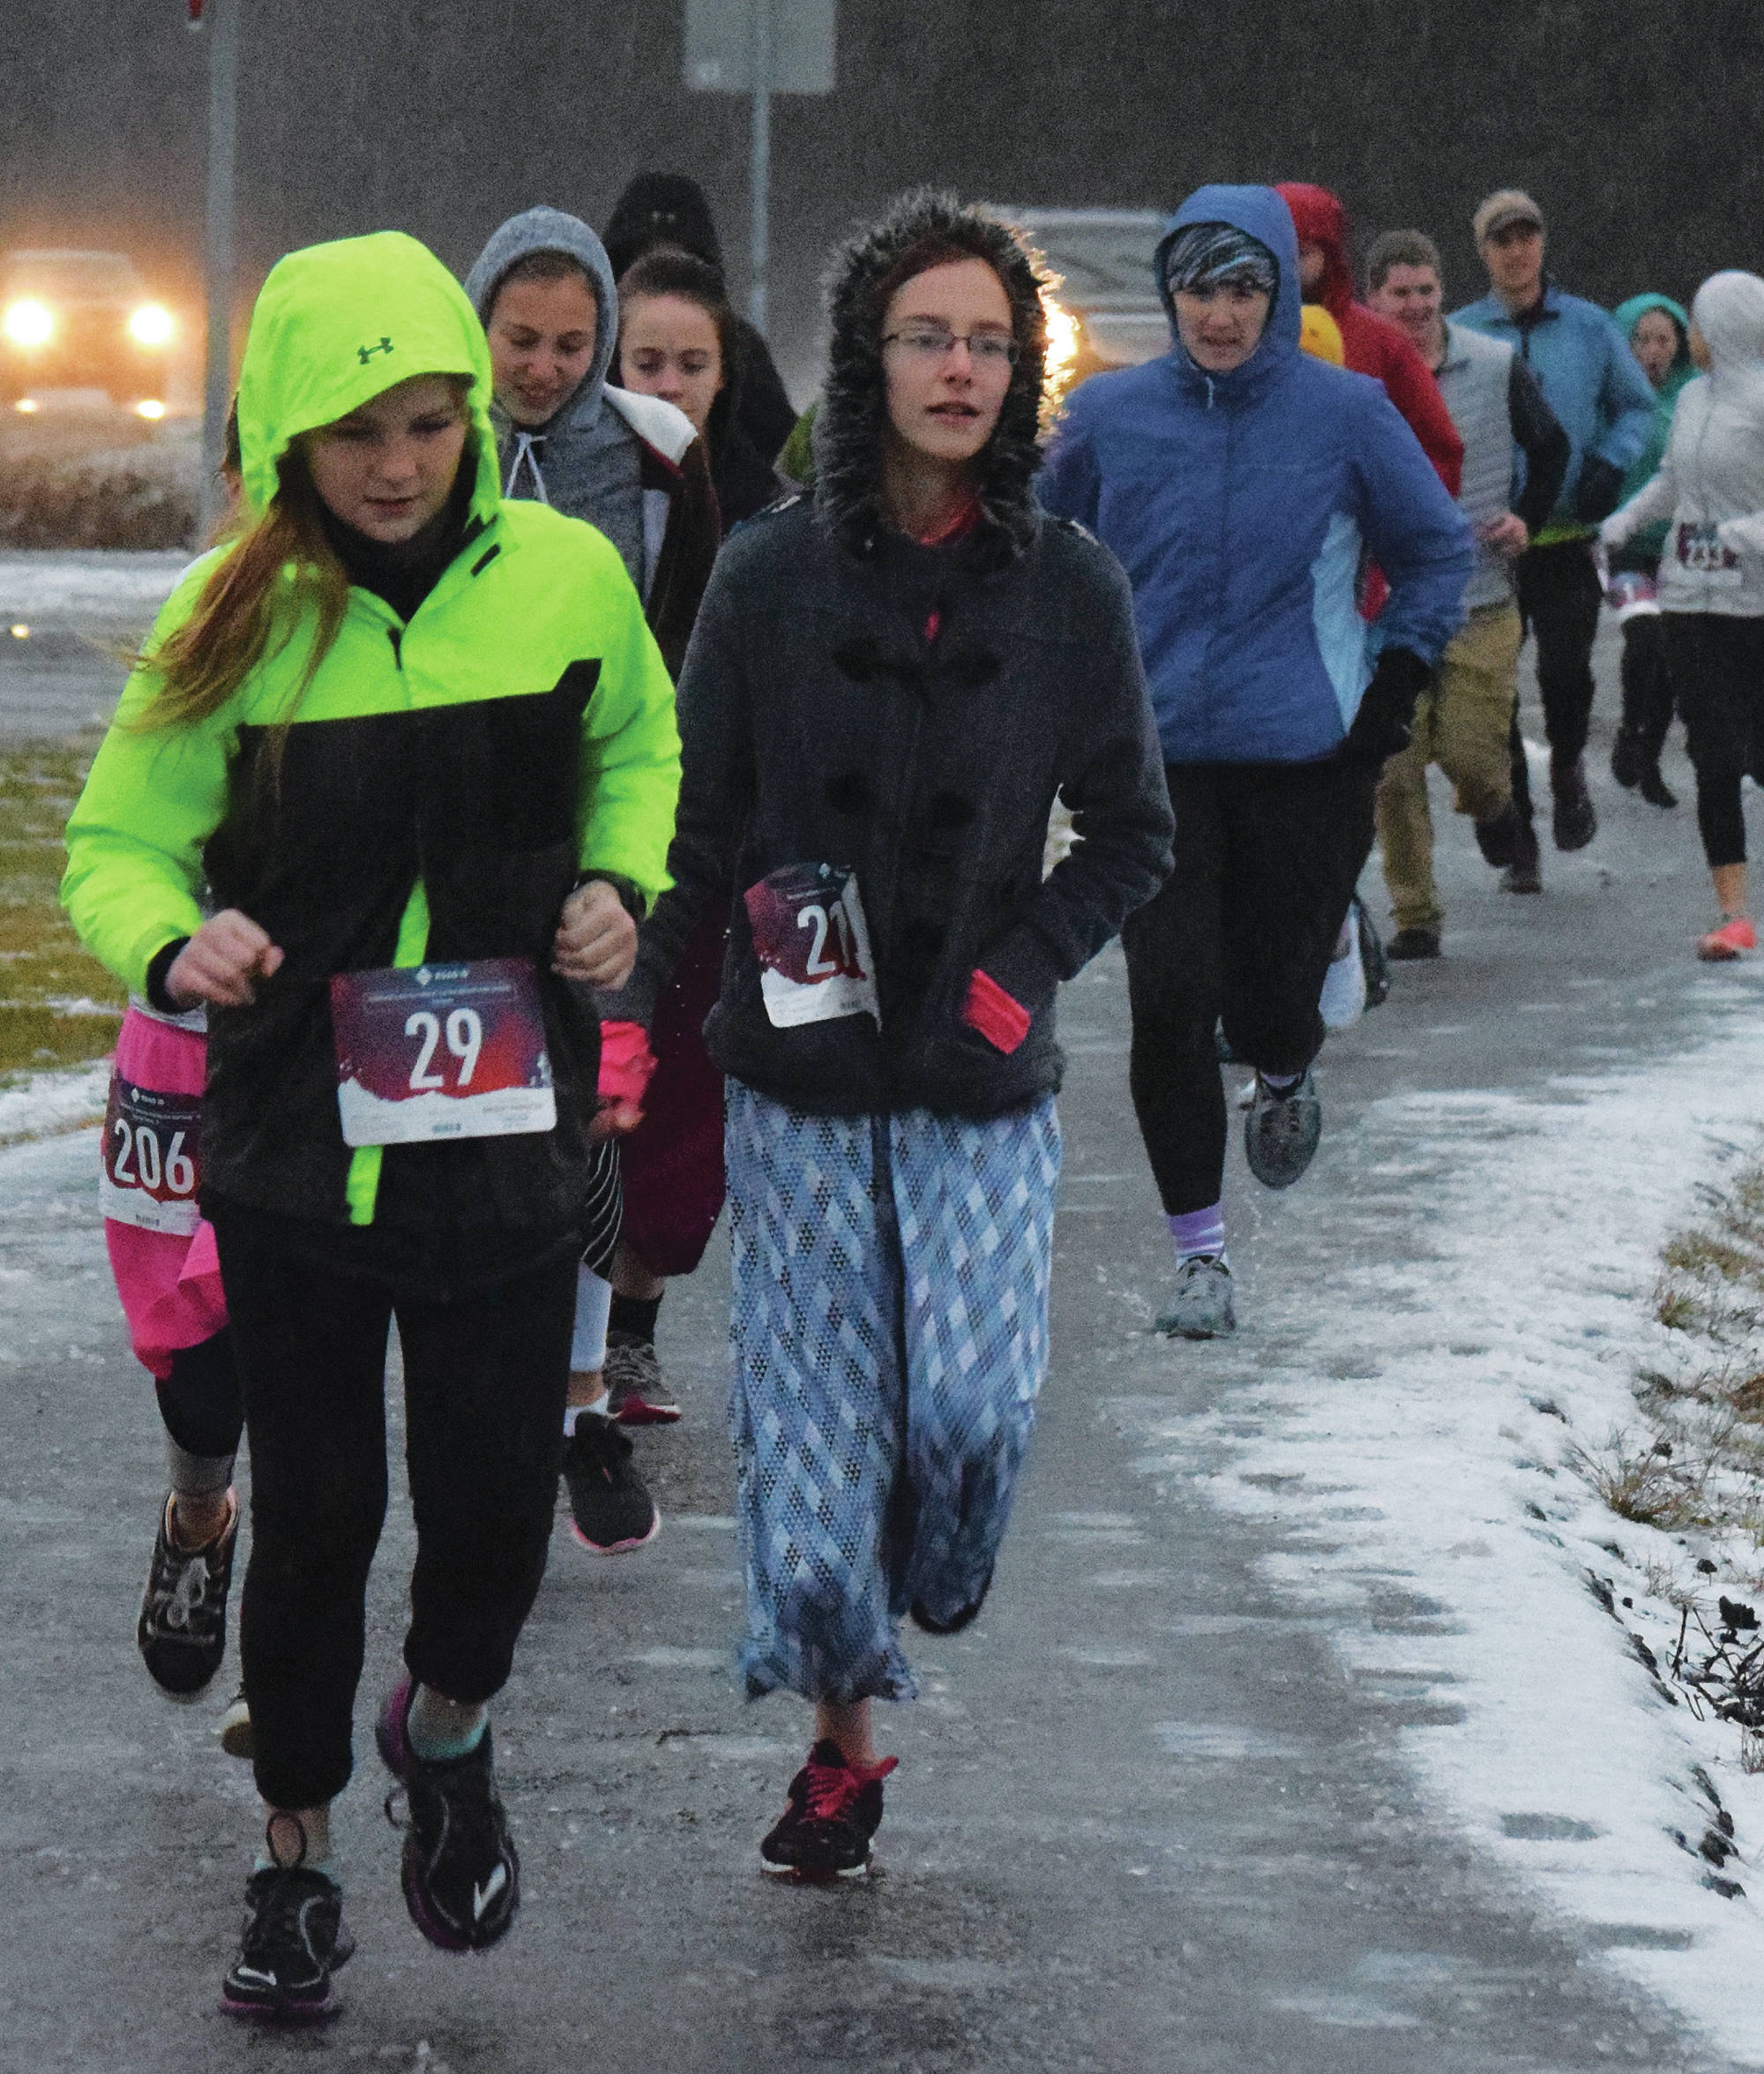 Two runners race together early Thursday, Nov. 28, 2019, at the Turkey Trot in Soldotna, Alaska. (Photo by Joey Klecka/Peninsula Clarion)